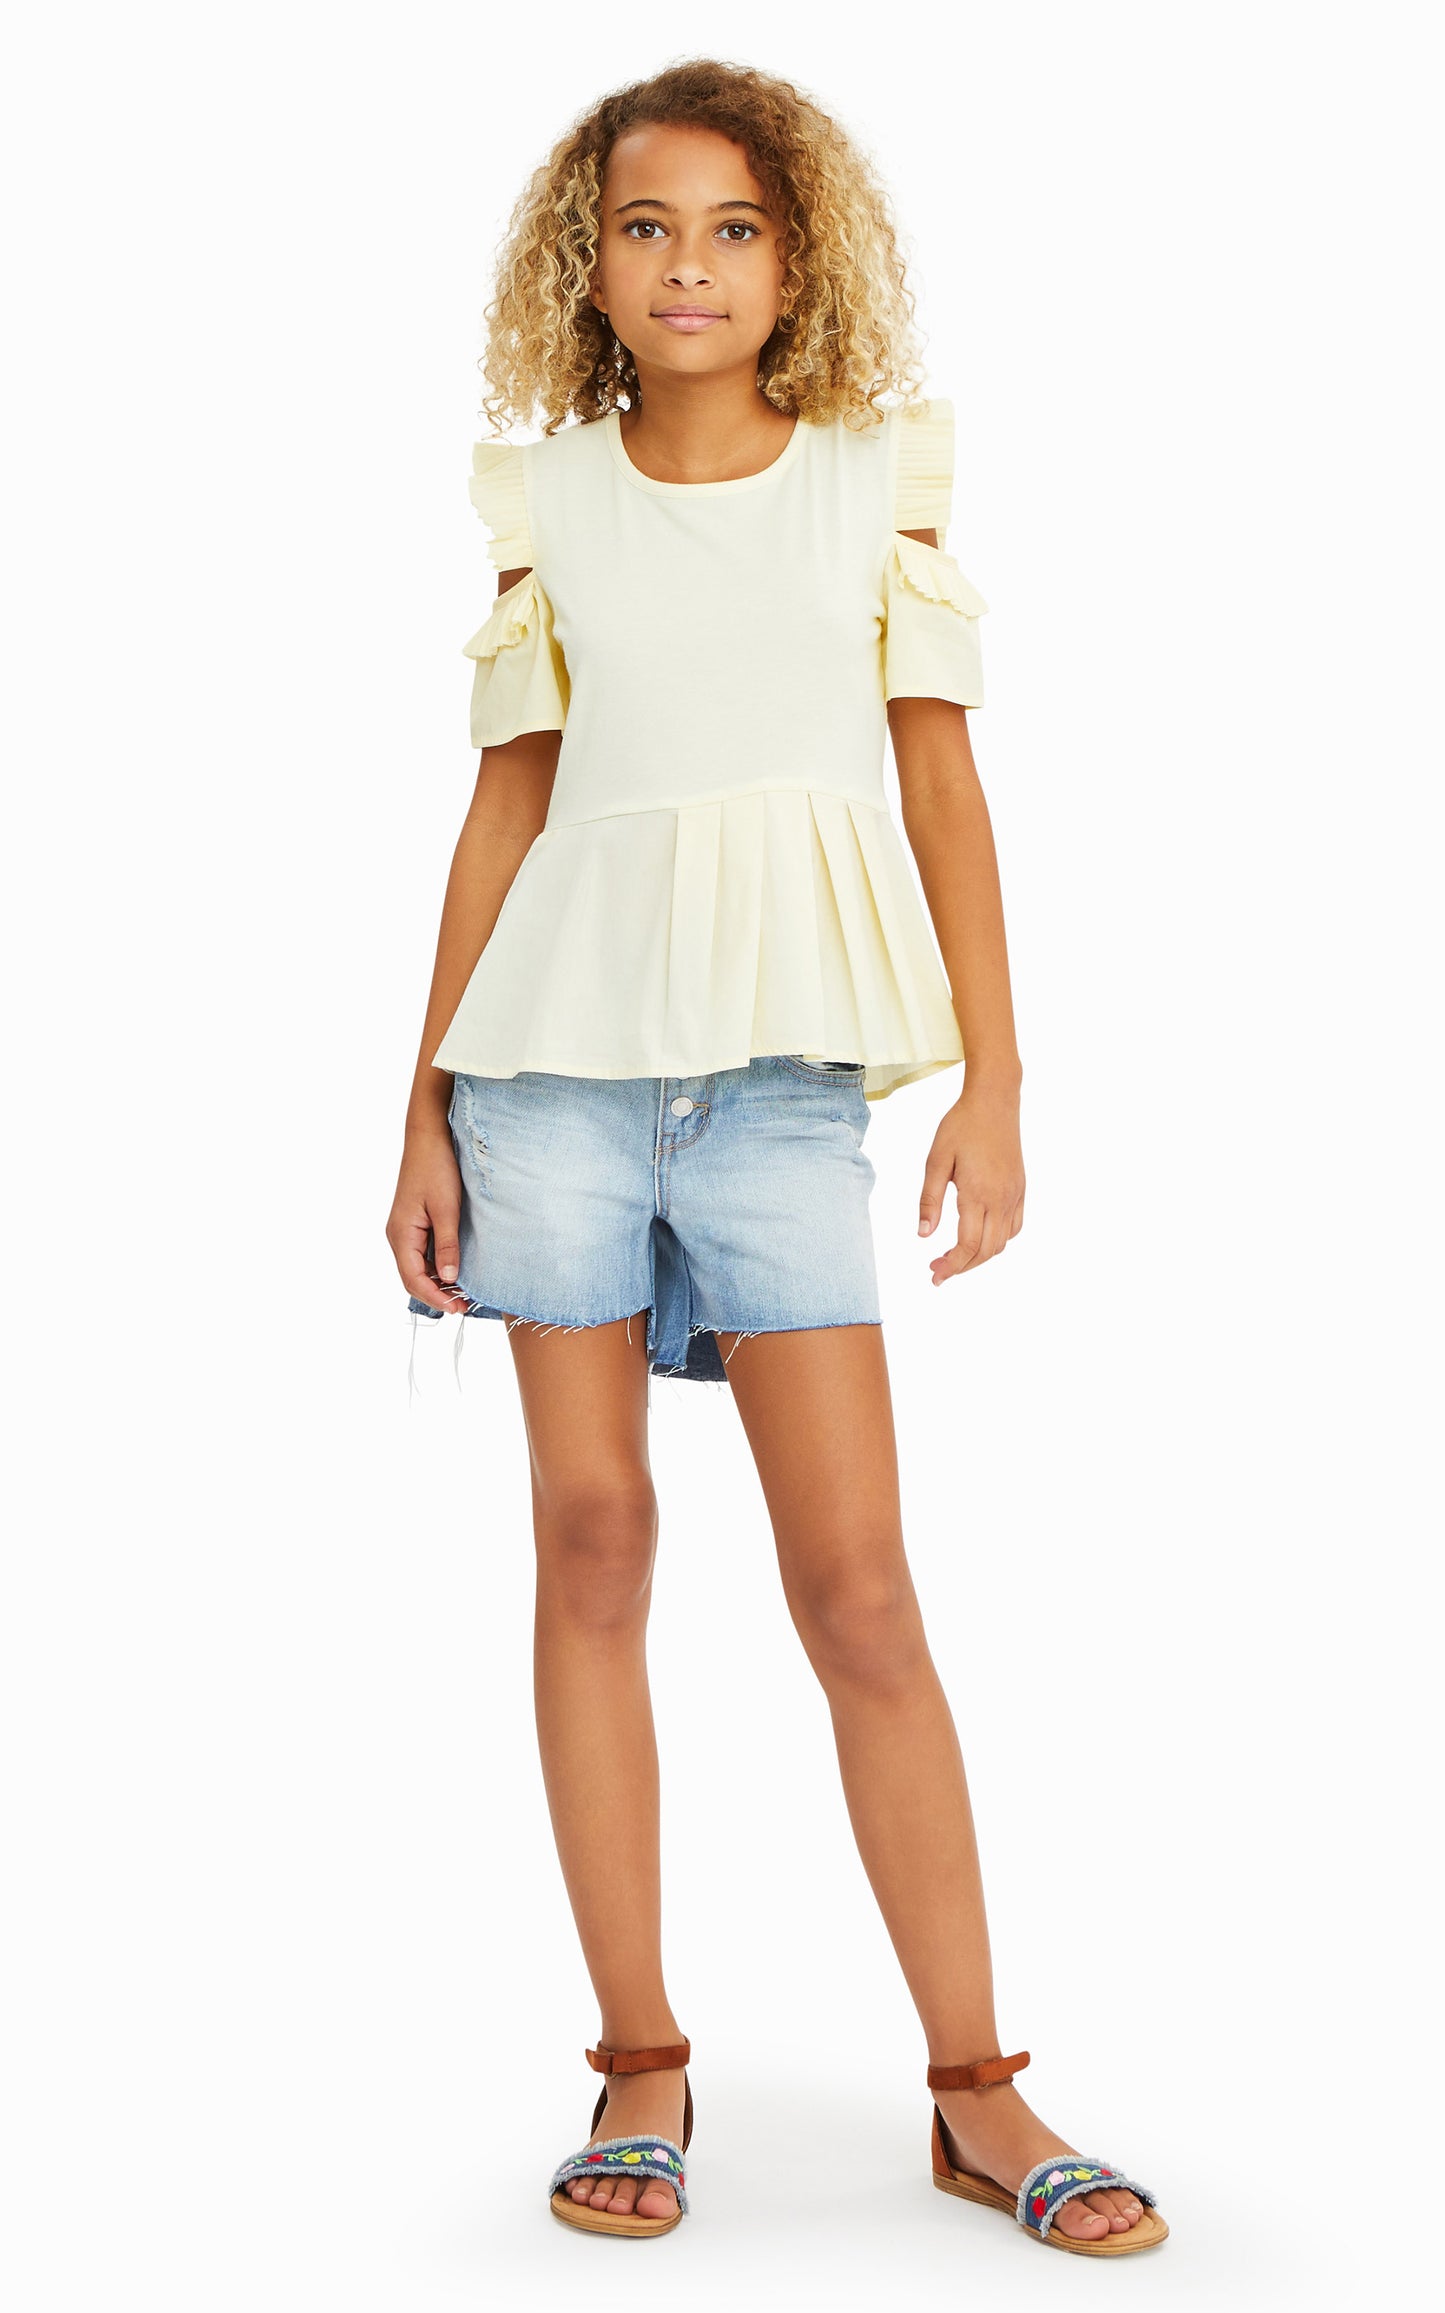 GIRL IN PALE YELLOW PLEATED PEPLUM TOP AND RIPPED JEAN SHORTS